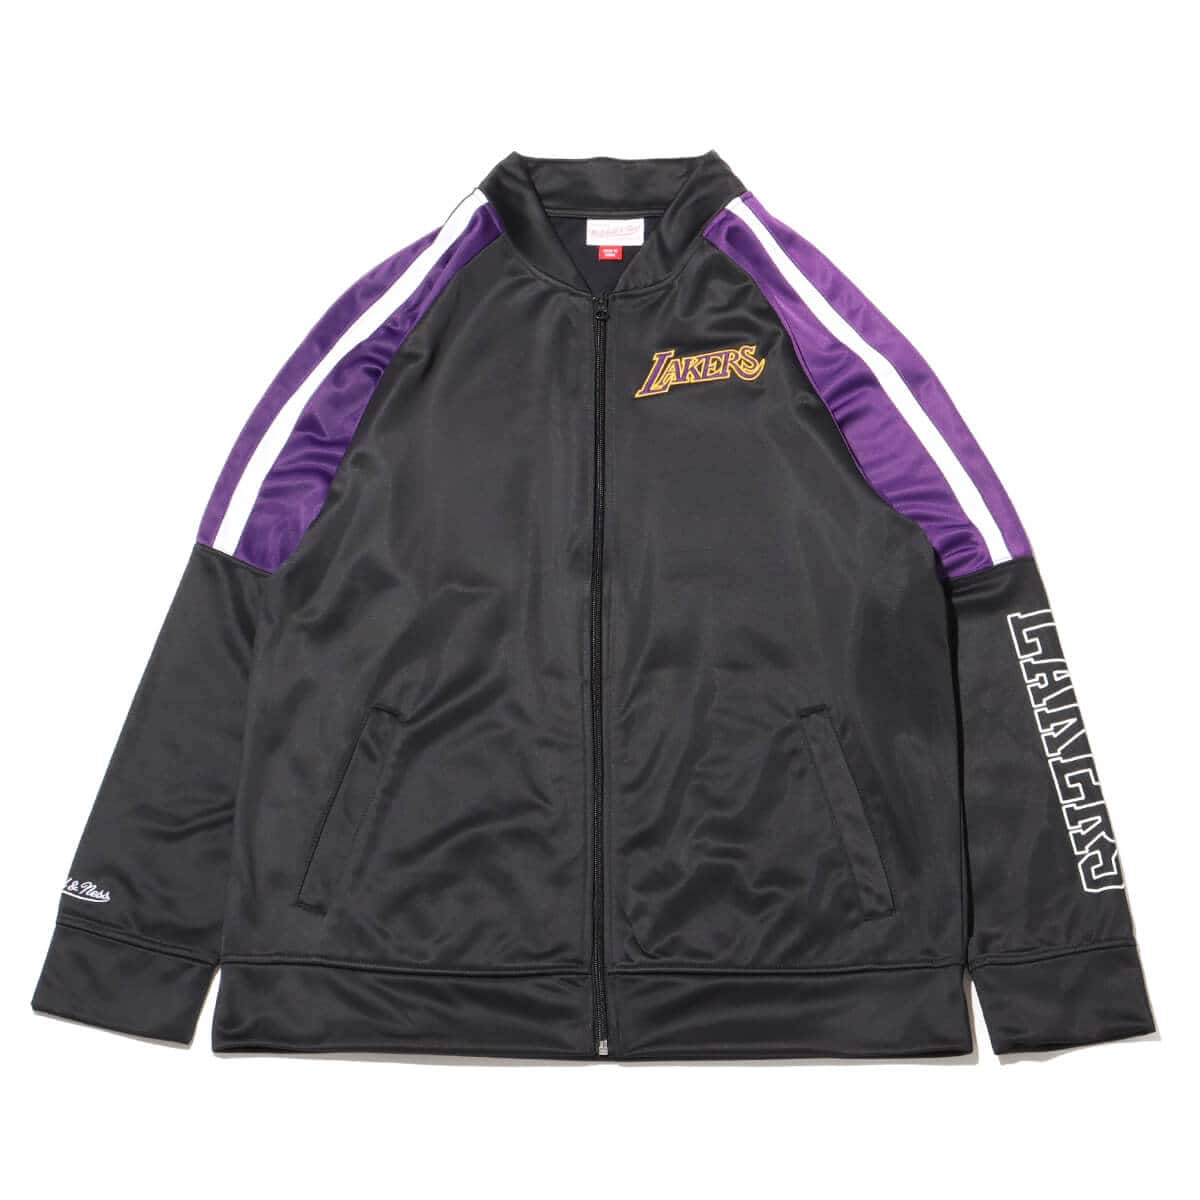 Mitchell & Ness COLOR BLOCKED TRACK JACKET LAL BLACK